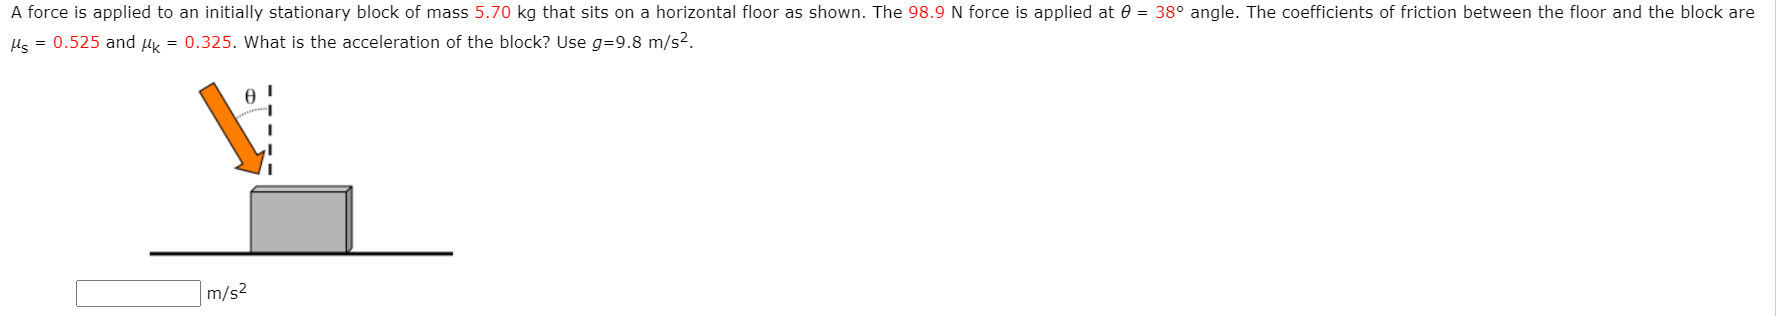 A force is applied to an initially stationary block of mass 5.70 kg that sits on a horizontal floor as shown. The 98.9N force is applied at 0 = 38° angle. The coefficients of friction between the floor and the block are
Hs = 0.525 and uy = 0.325. What is the acceleration of the block? Use g=9.8 m/s2.
